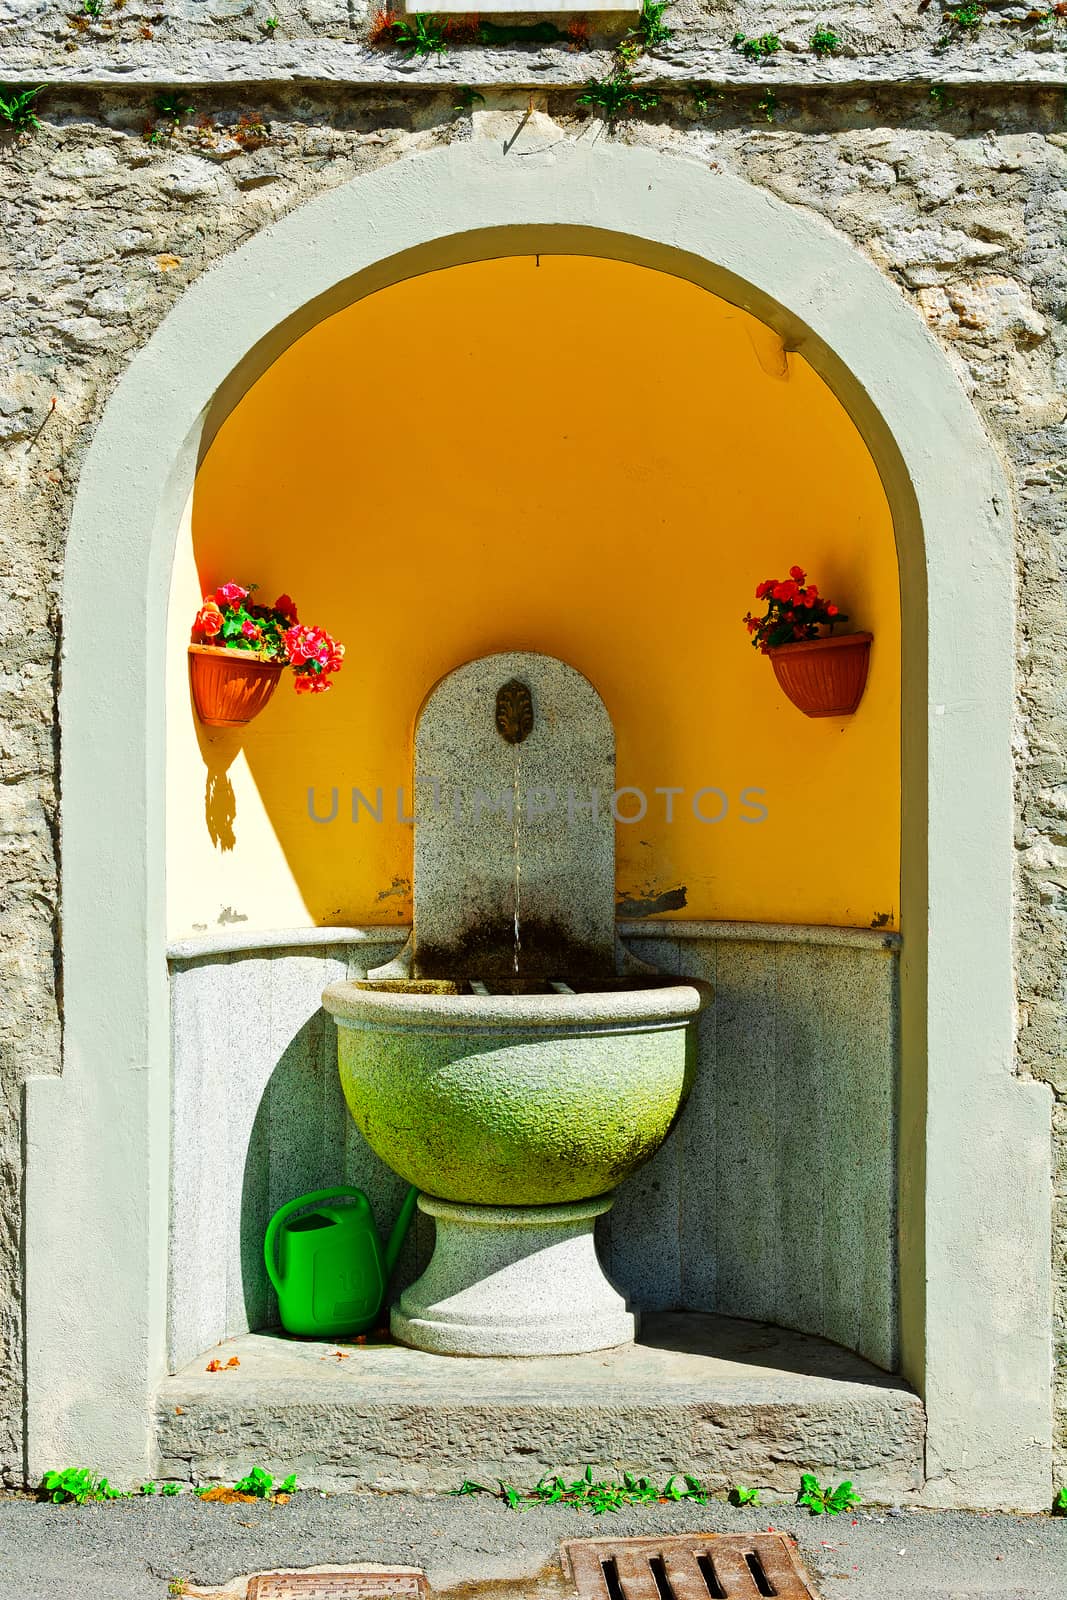 Drinking Fountain by gkuna